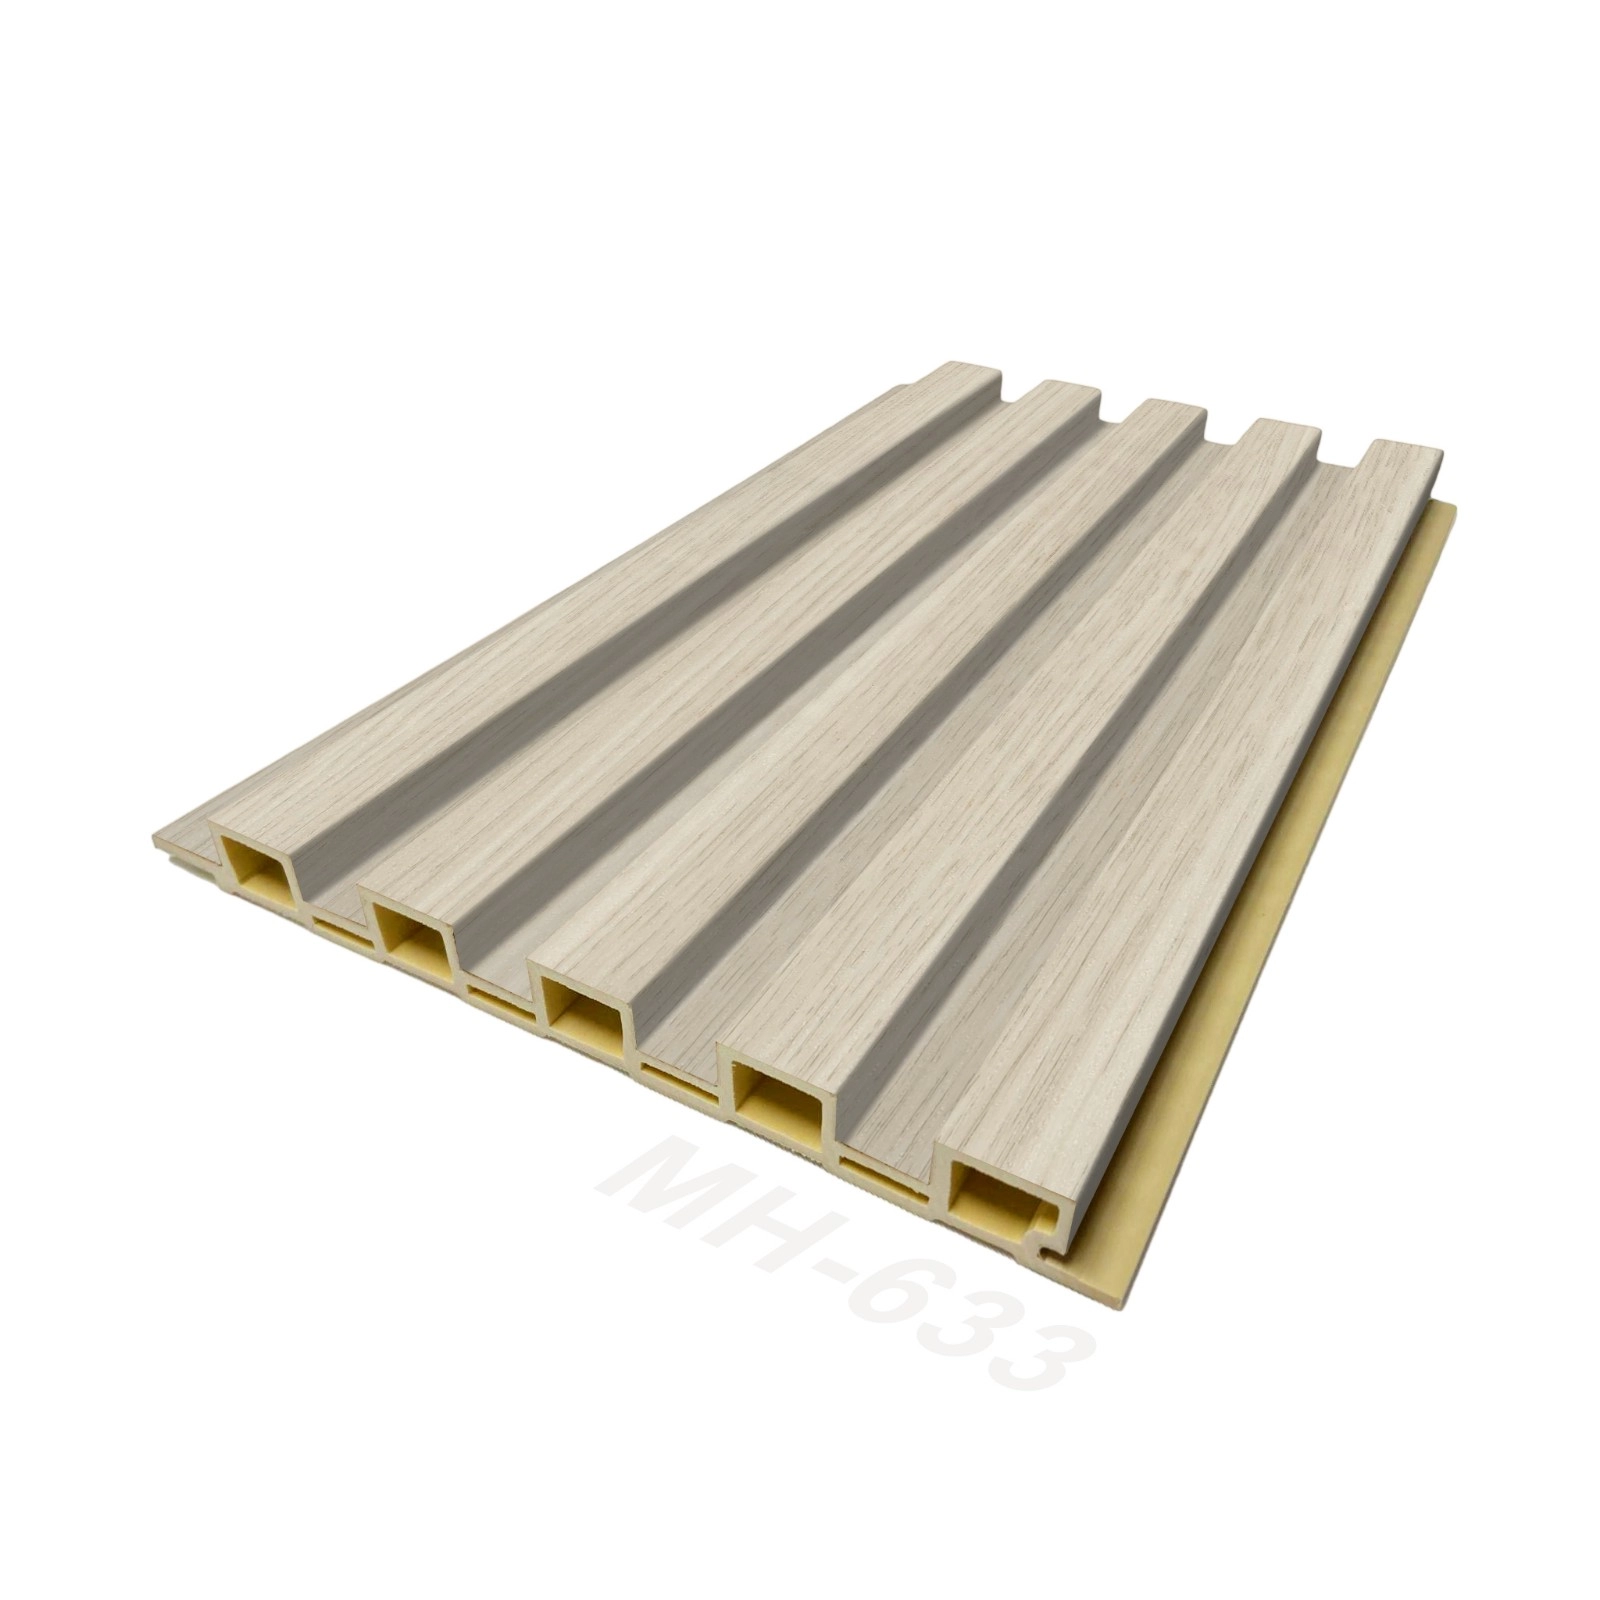 Laminated Wooden Pvc Decorative Grille Wall Panels